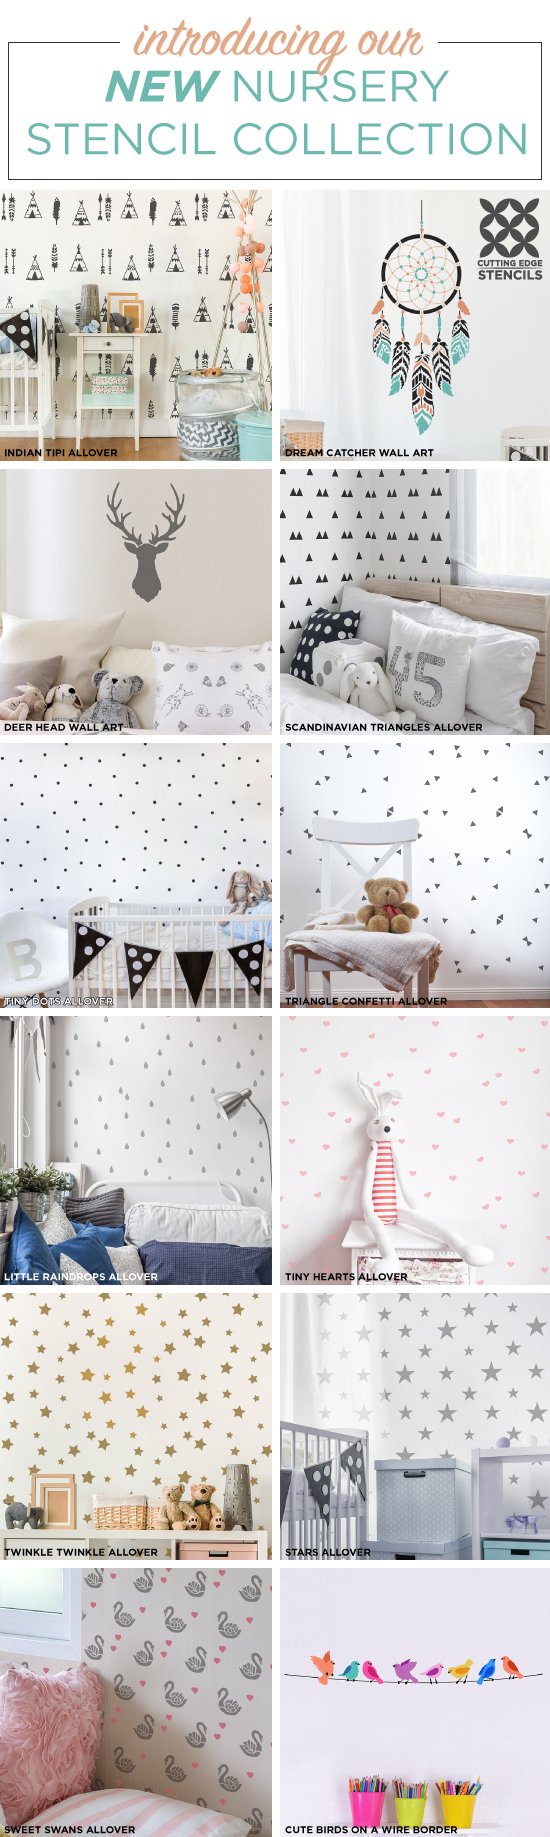 Cutting Edge Stencils is excited to introduce NEW nursery stencil patterns for walls, furniture, and DIY home decorating projects. http://www.cuttingedgestencils.com/nursery-stencils-walls.html